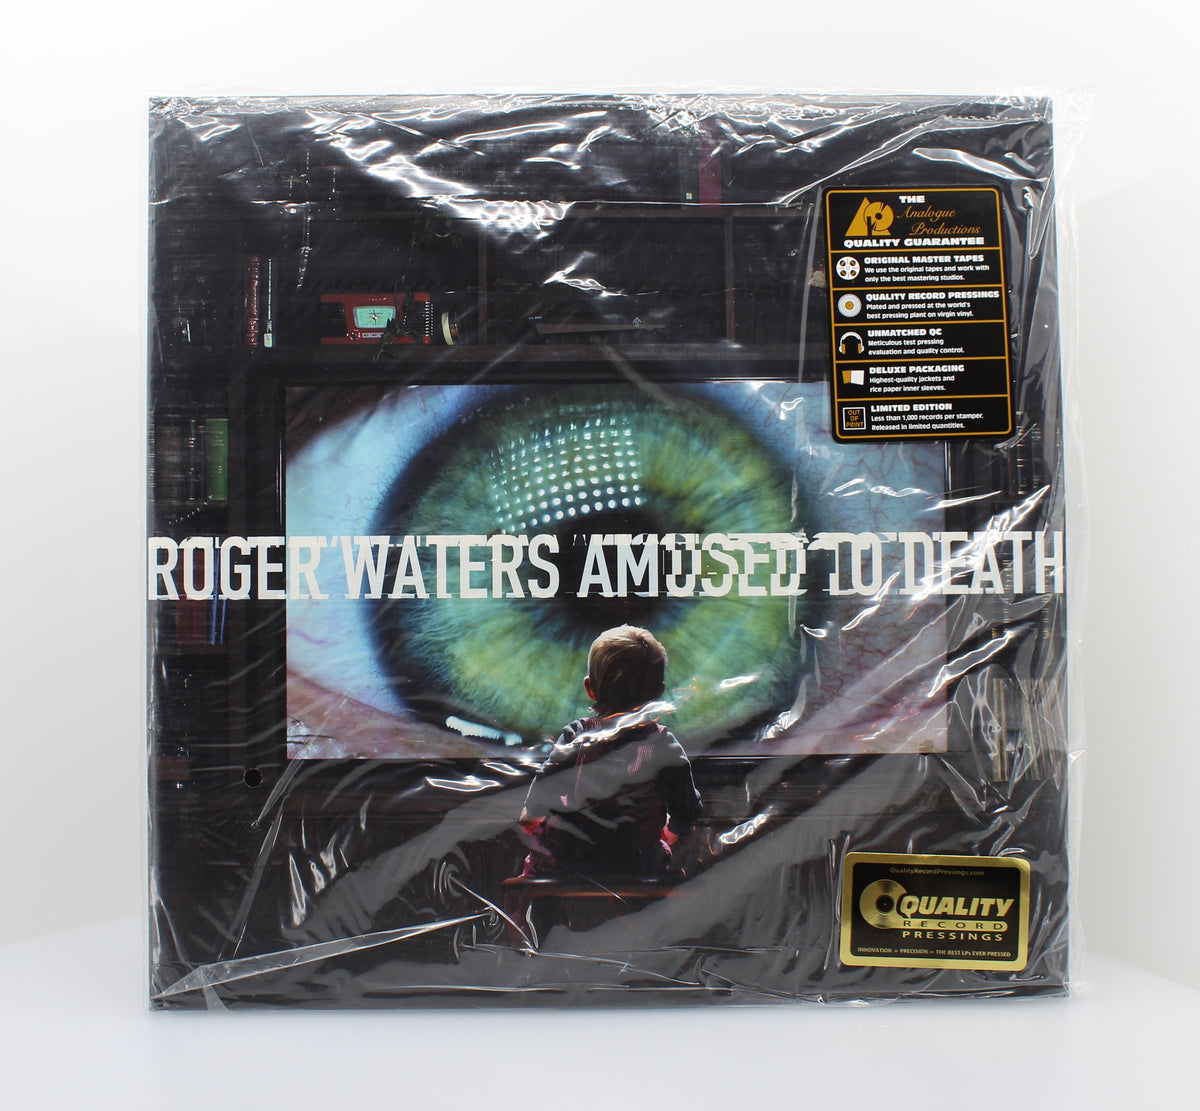 Roger Waters - Amused To Death, 2 x Vinyl, LP, Album, Limited Edition, Audiophile, USA 2015